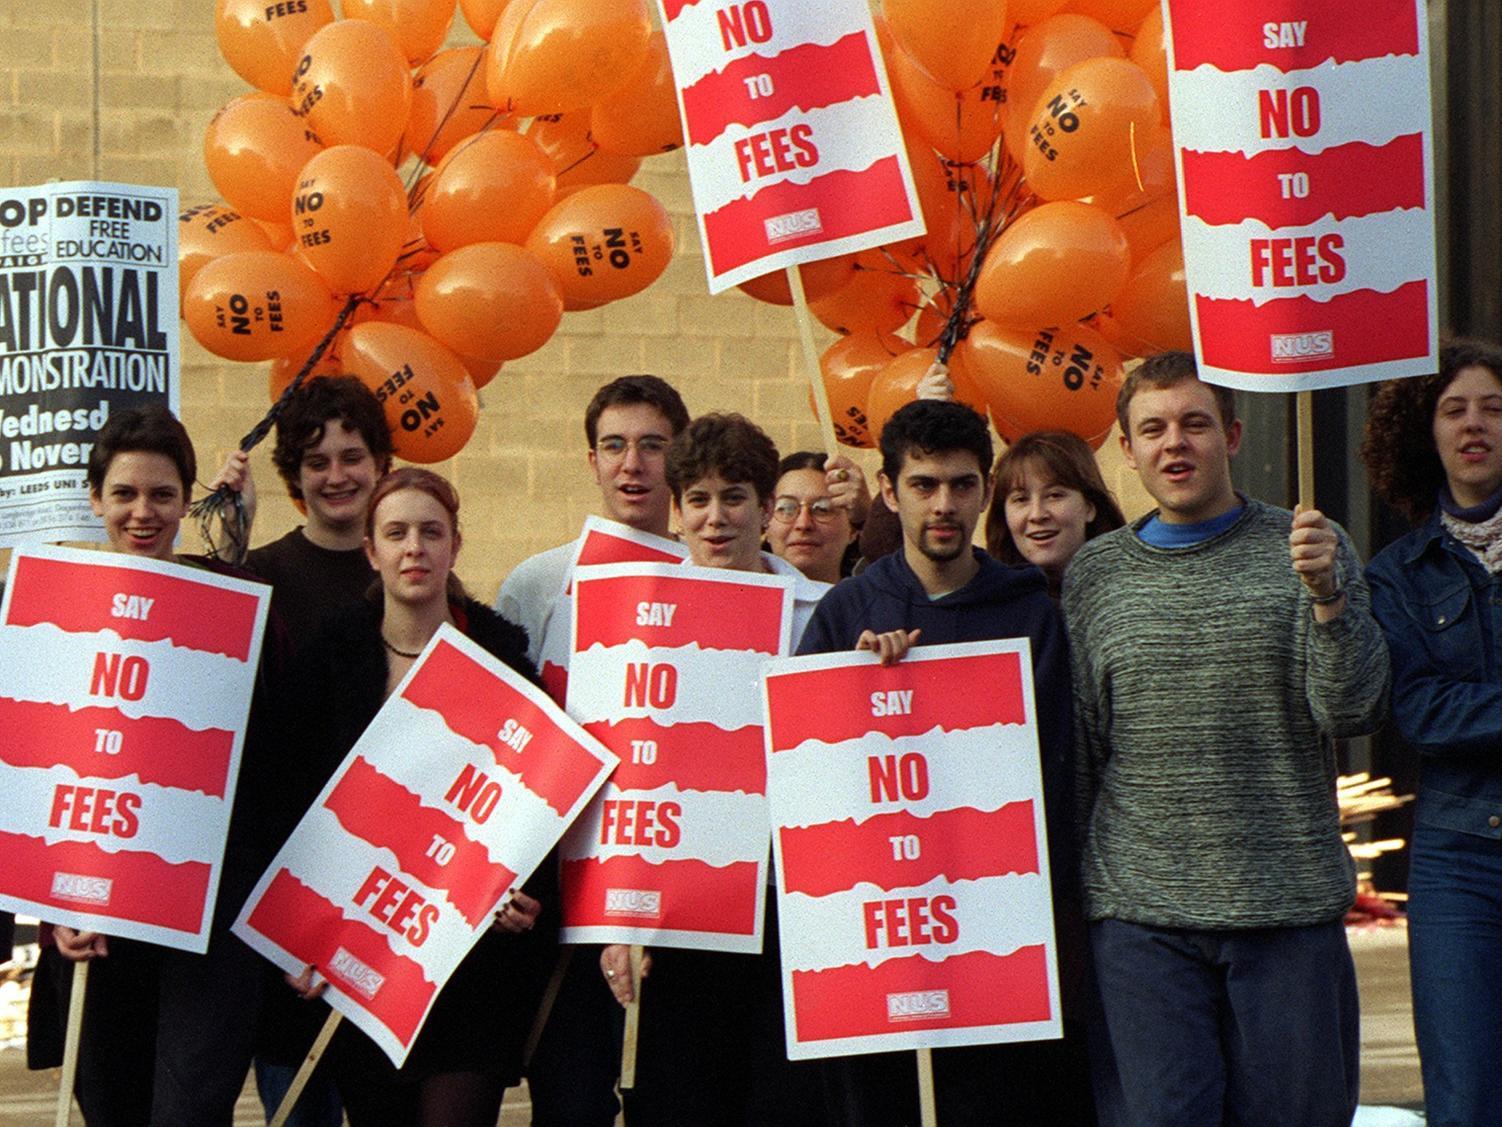 University of Leeds Leeds students marched in protest against fees in November 1997.